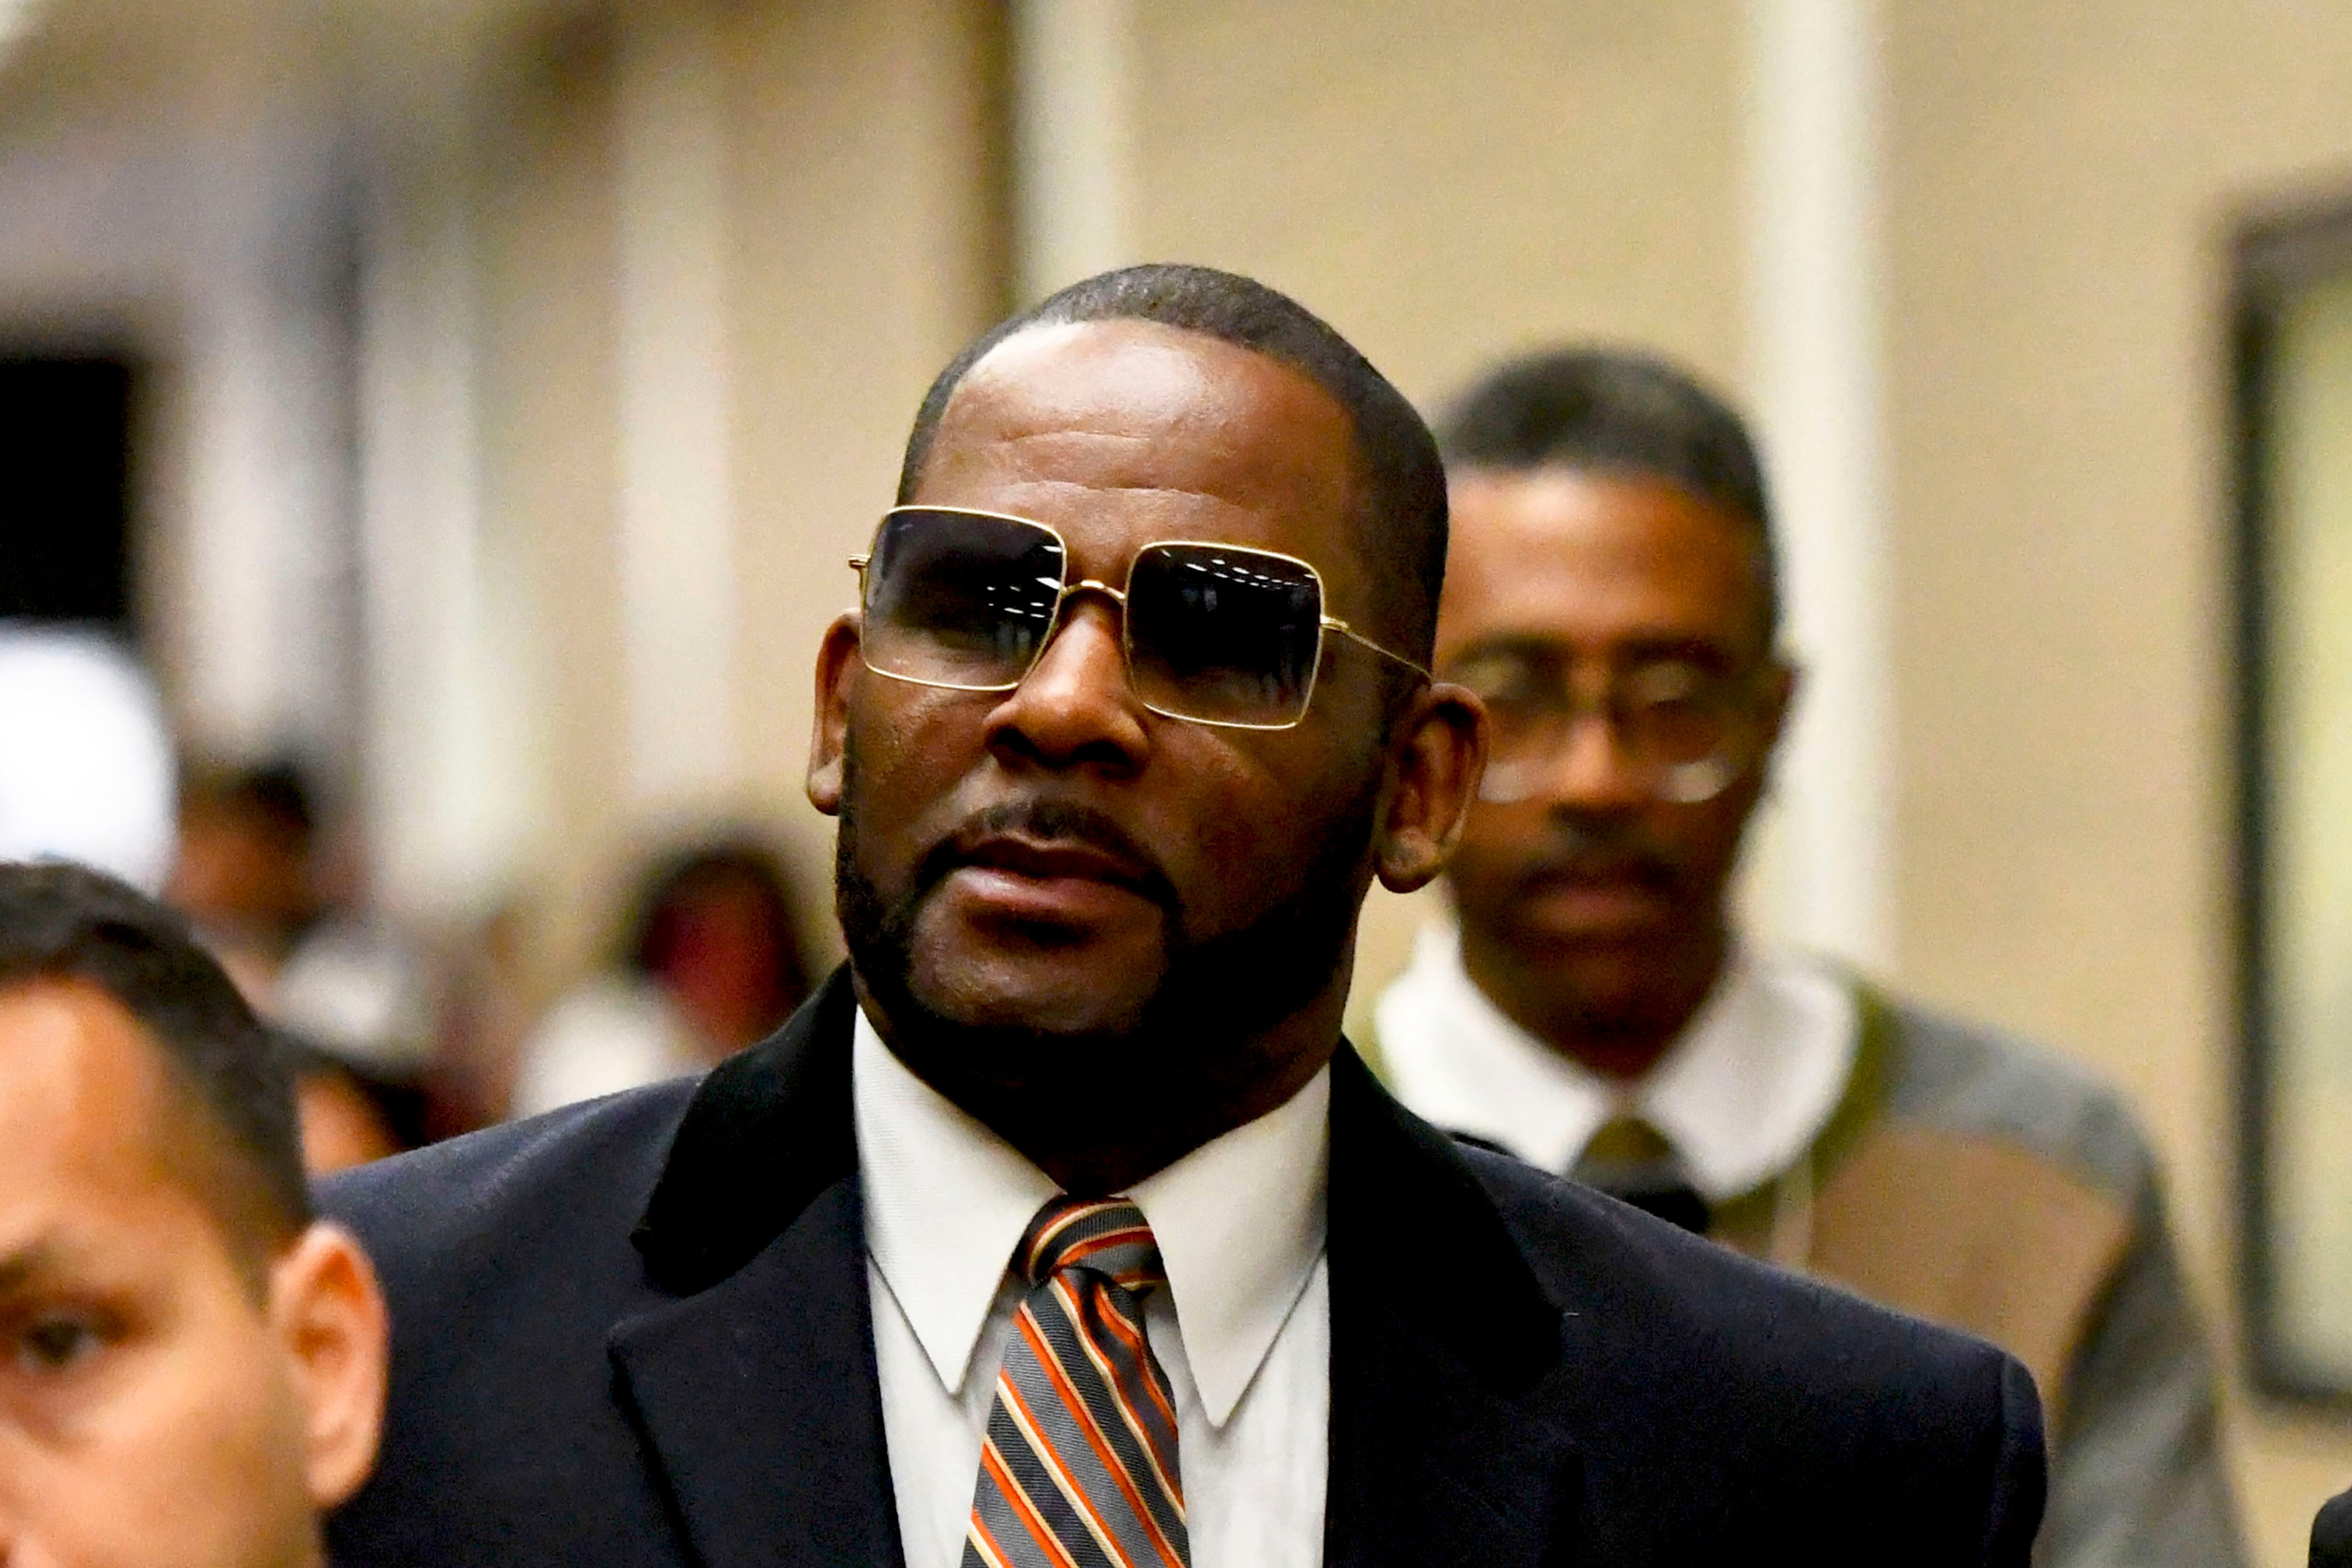 R. Kelly acquitted on rigging trial. Why?